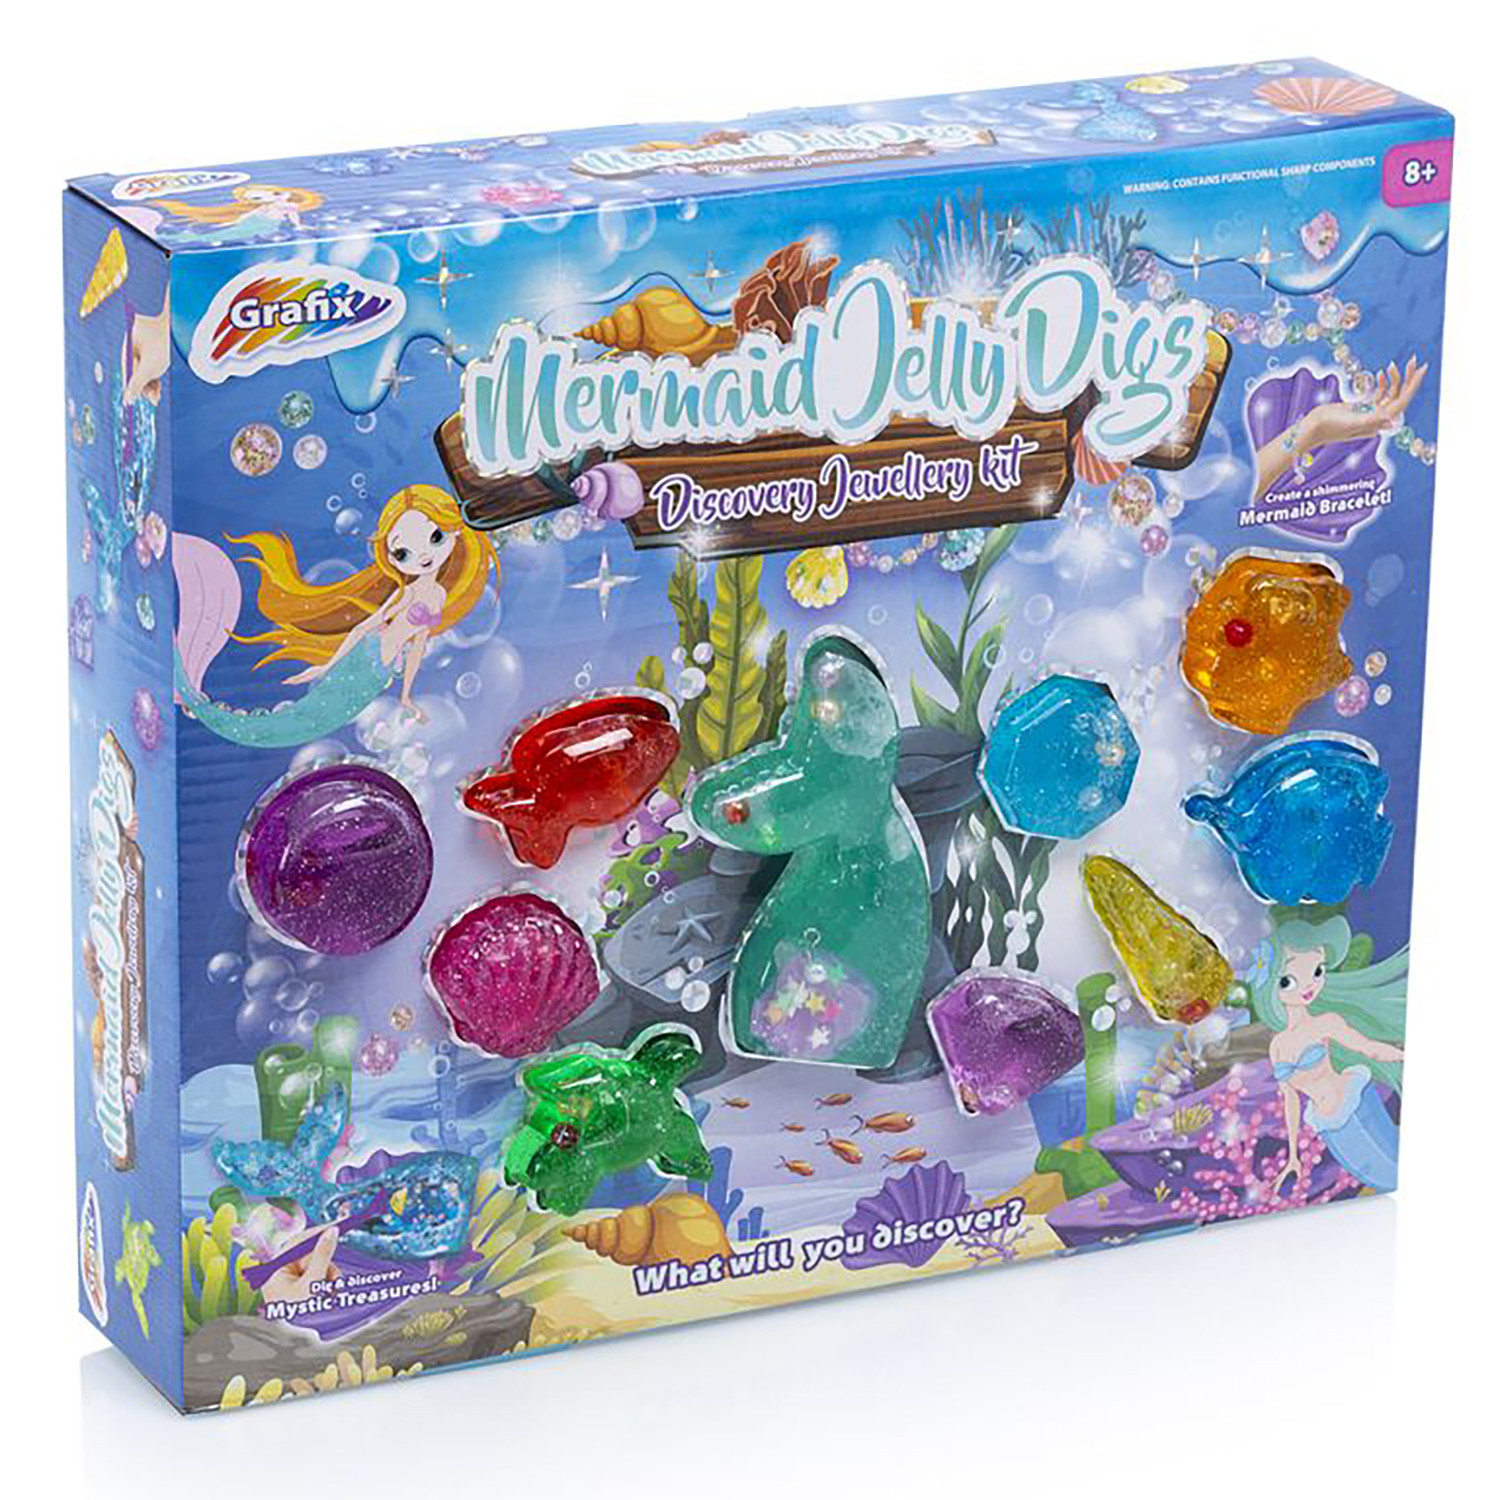 Mermaid Jelly Digs Discovery Jewellery Kit Image